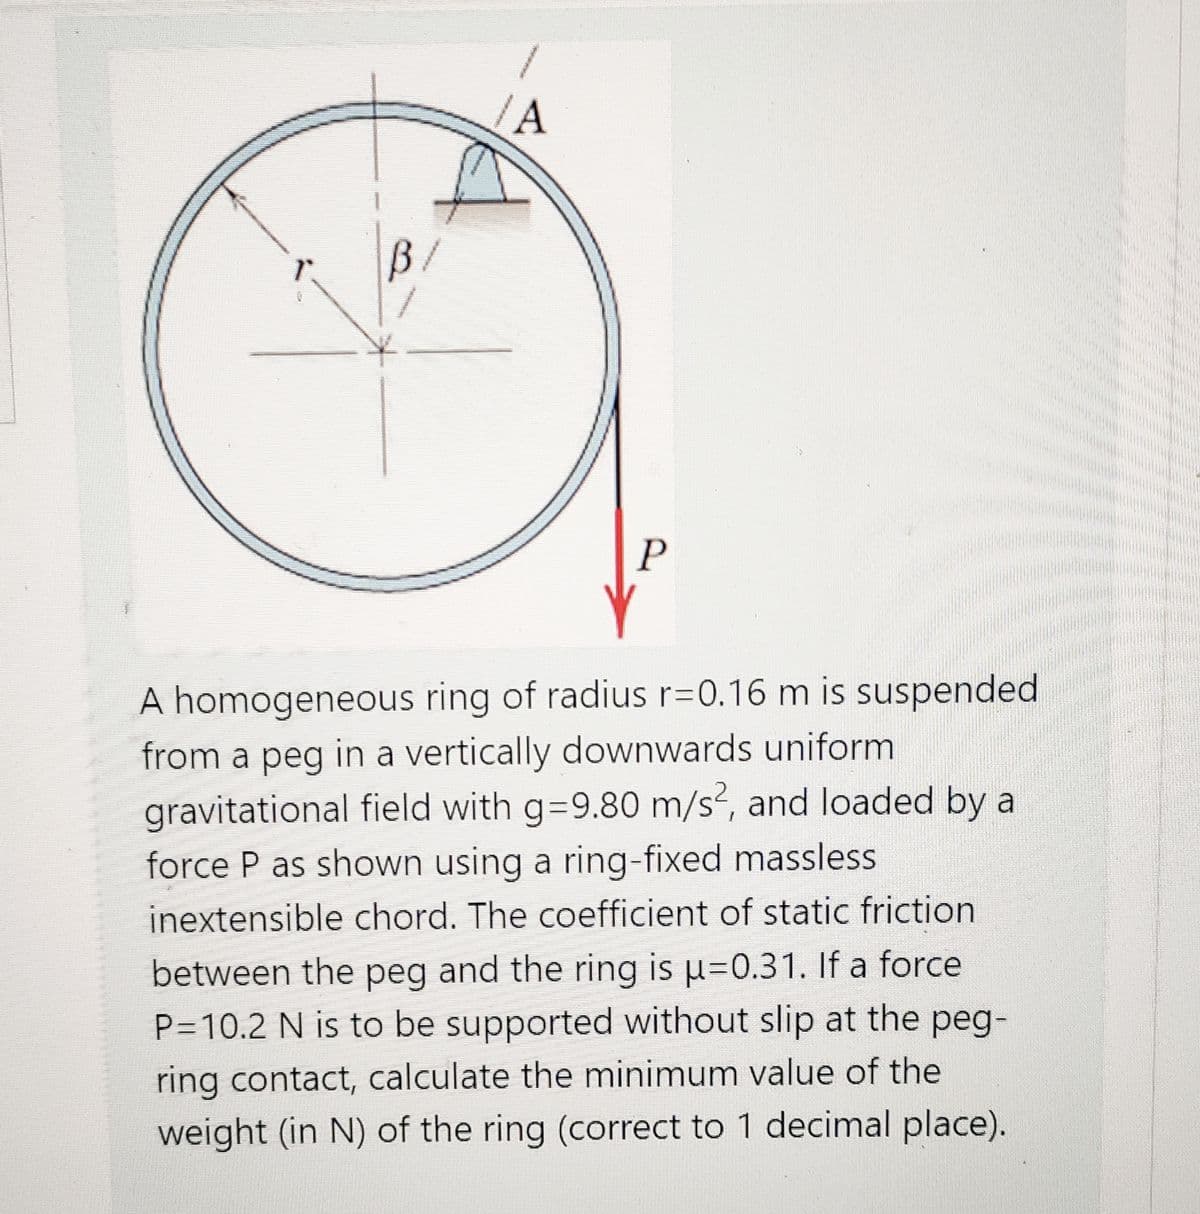 /A
B/
P
A homogeneous ring of radius r=0.16 m is suspended
from a peg in a vertically downwards uniform
gravitational field with g=9.80 m/s?, and loaded by a
force P as shown using a ring-fixed massless
inextensible chord. The coefficient of static friction
between the peg and the ring is u=0.31. If a force
P=10.2 N is to be supported without slip at the peg-
ring contact, calculate the minimum value of the
weight (in N) of the ring (correct to 1 decimal place).
